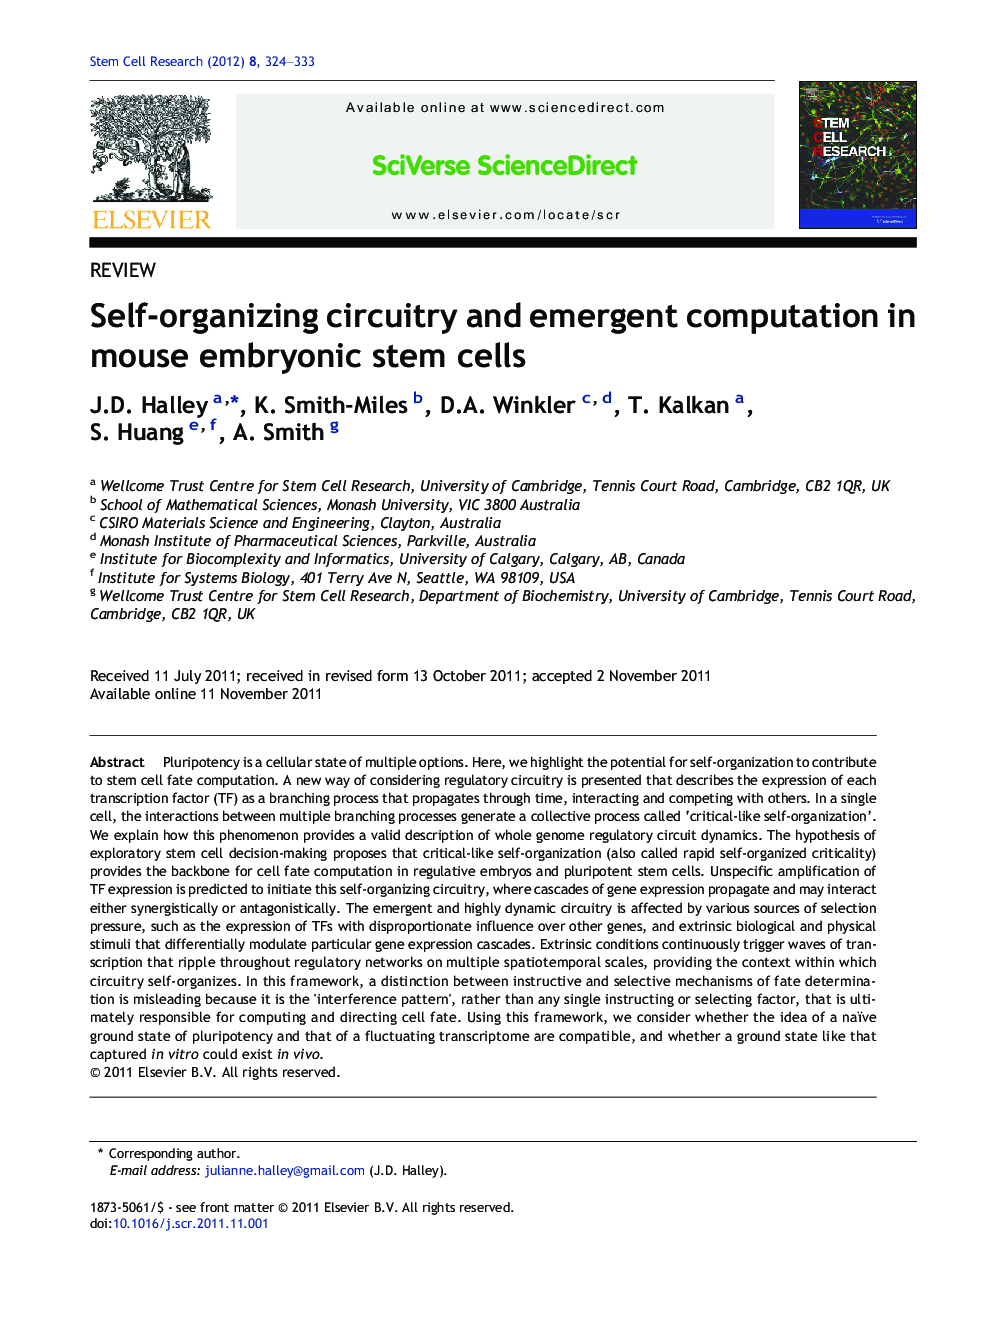 Self-organizing circuitry and emergent computation in mouse embryonic stem cells